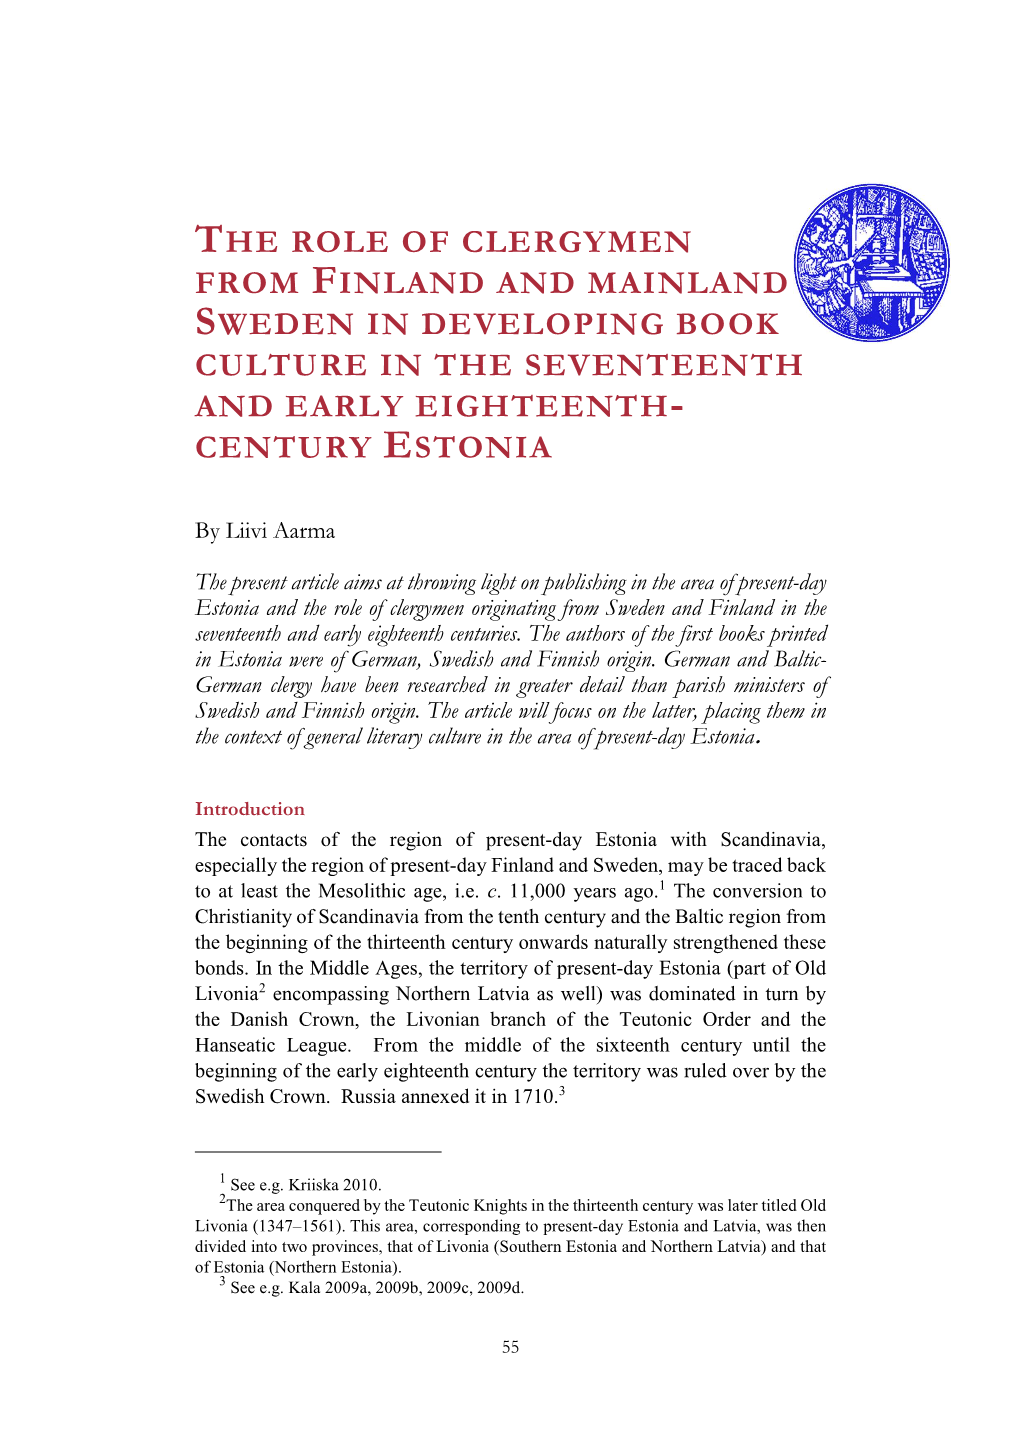 The Role of Clergymen from Finland and Mainland Sweden in Developing Book Culture in the Seventeenth and Early Eighteenth- Century Estonia